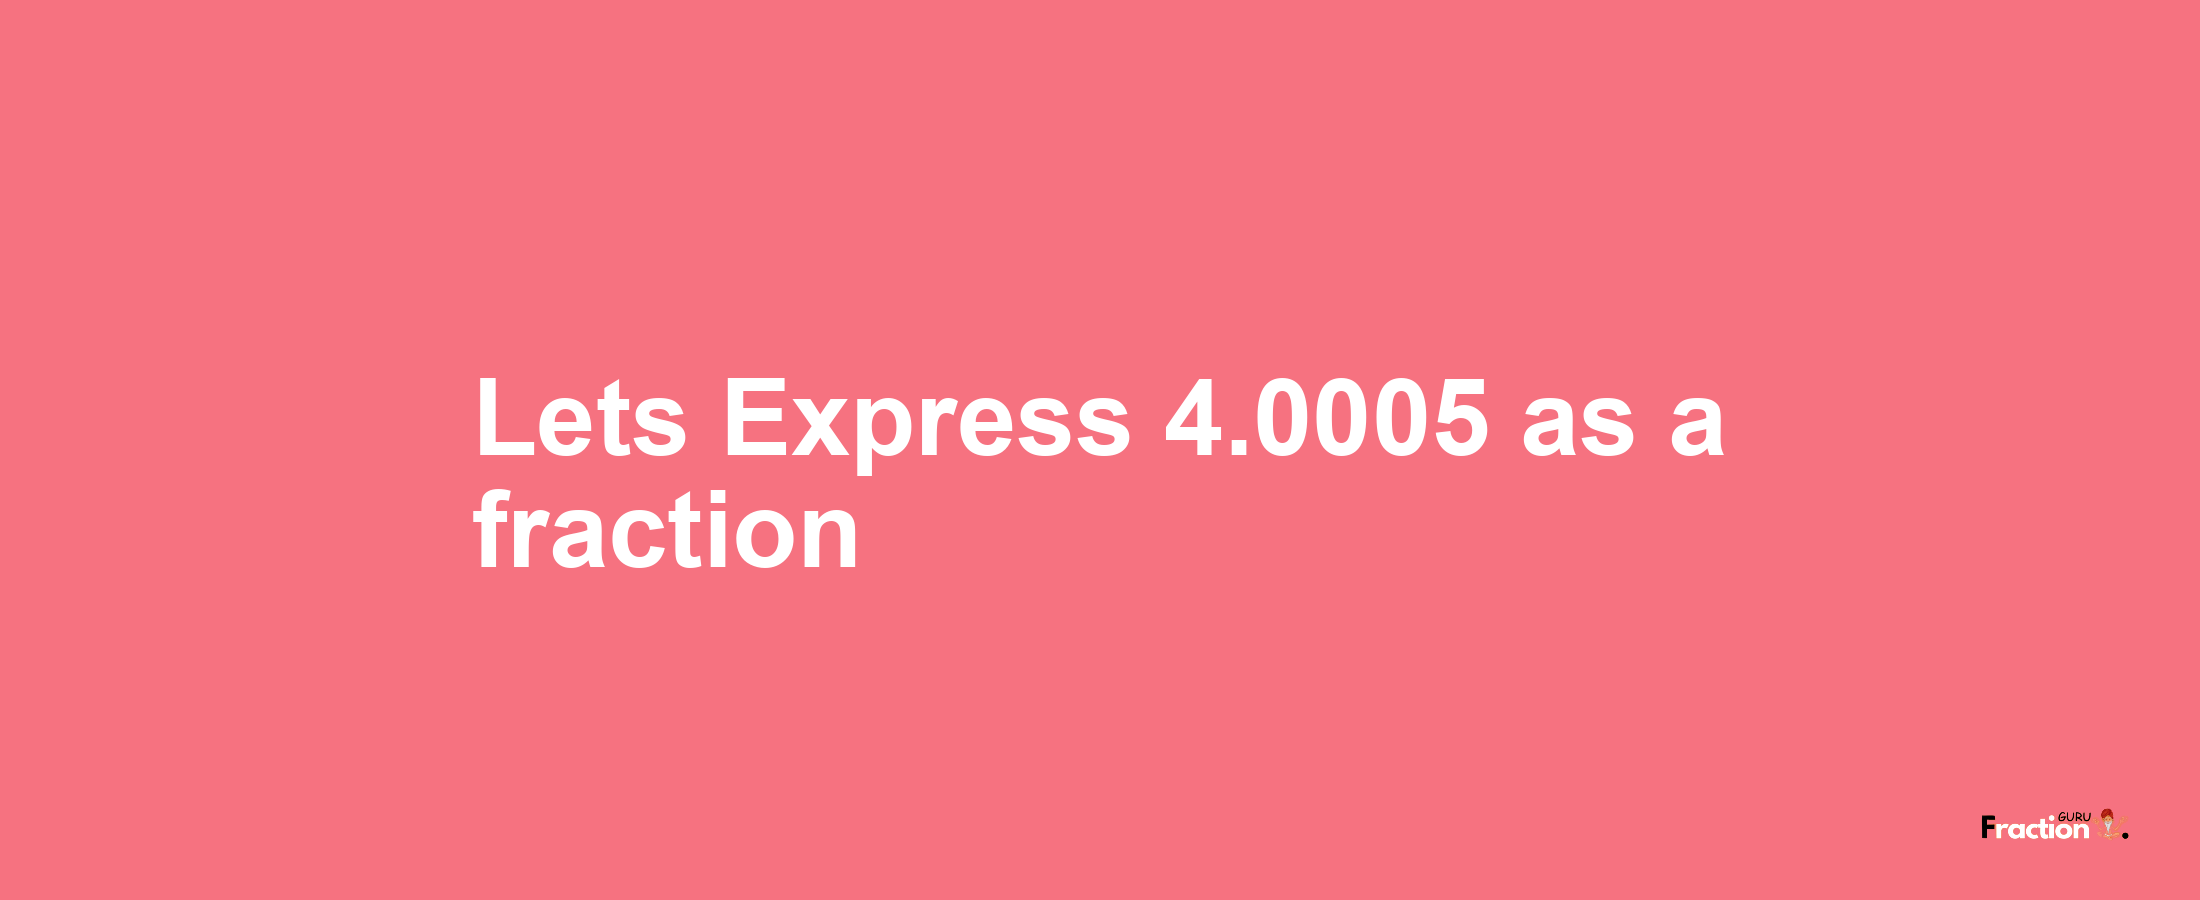 Lets Express 4.0005 as afraction